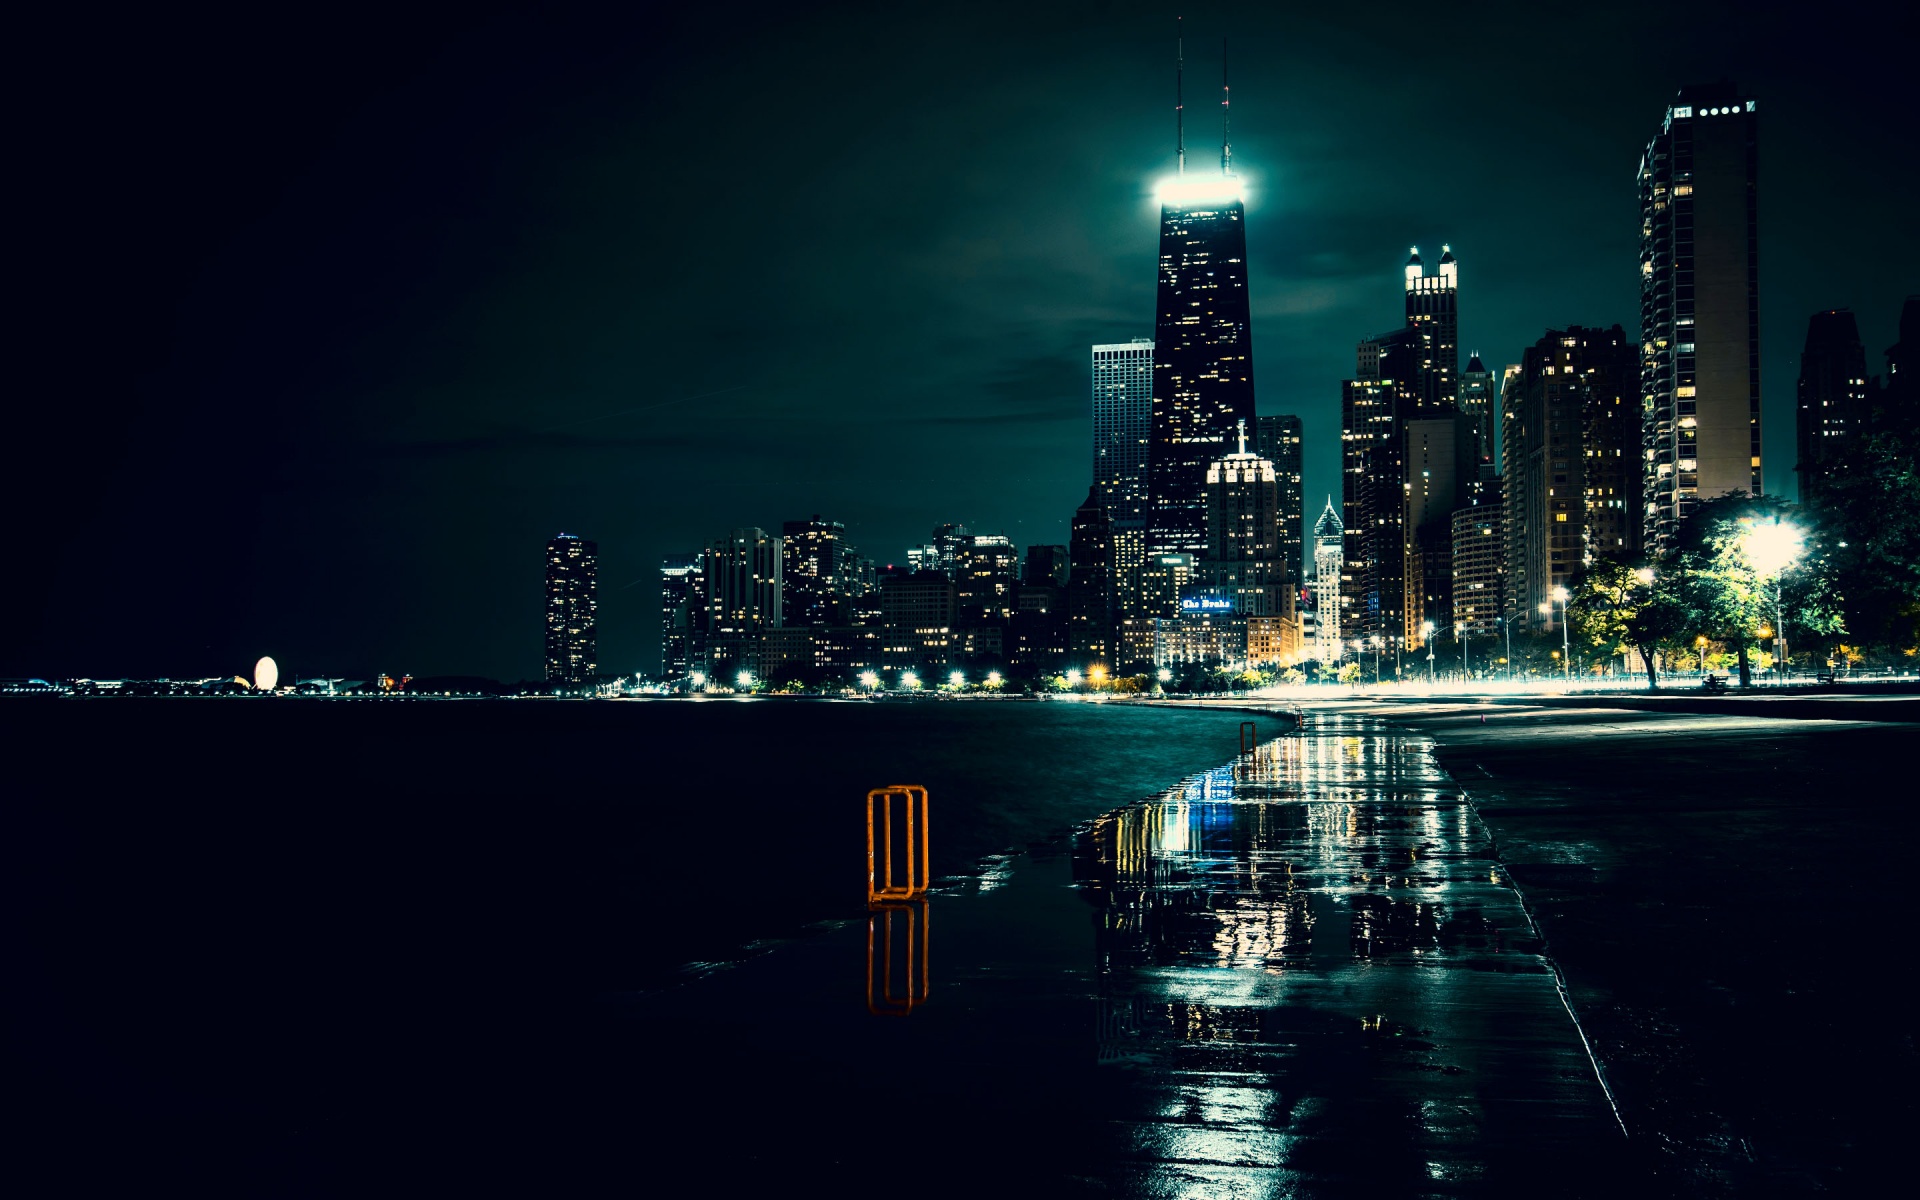 Chicago Night Building And River